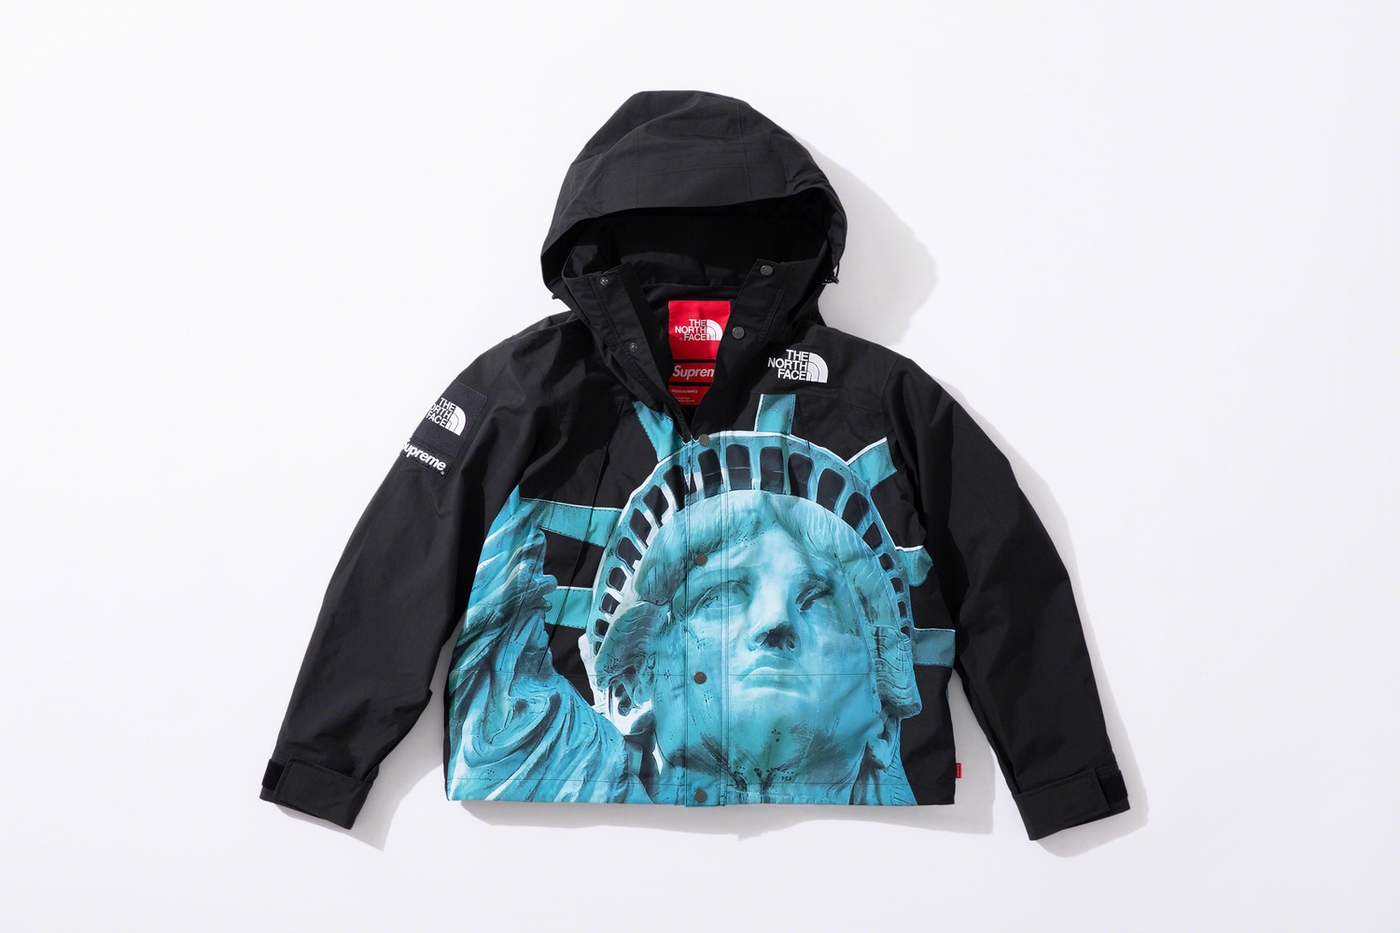 Statue of Liberty Mountain Jacket with packable hood. (20/29)